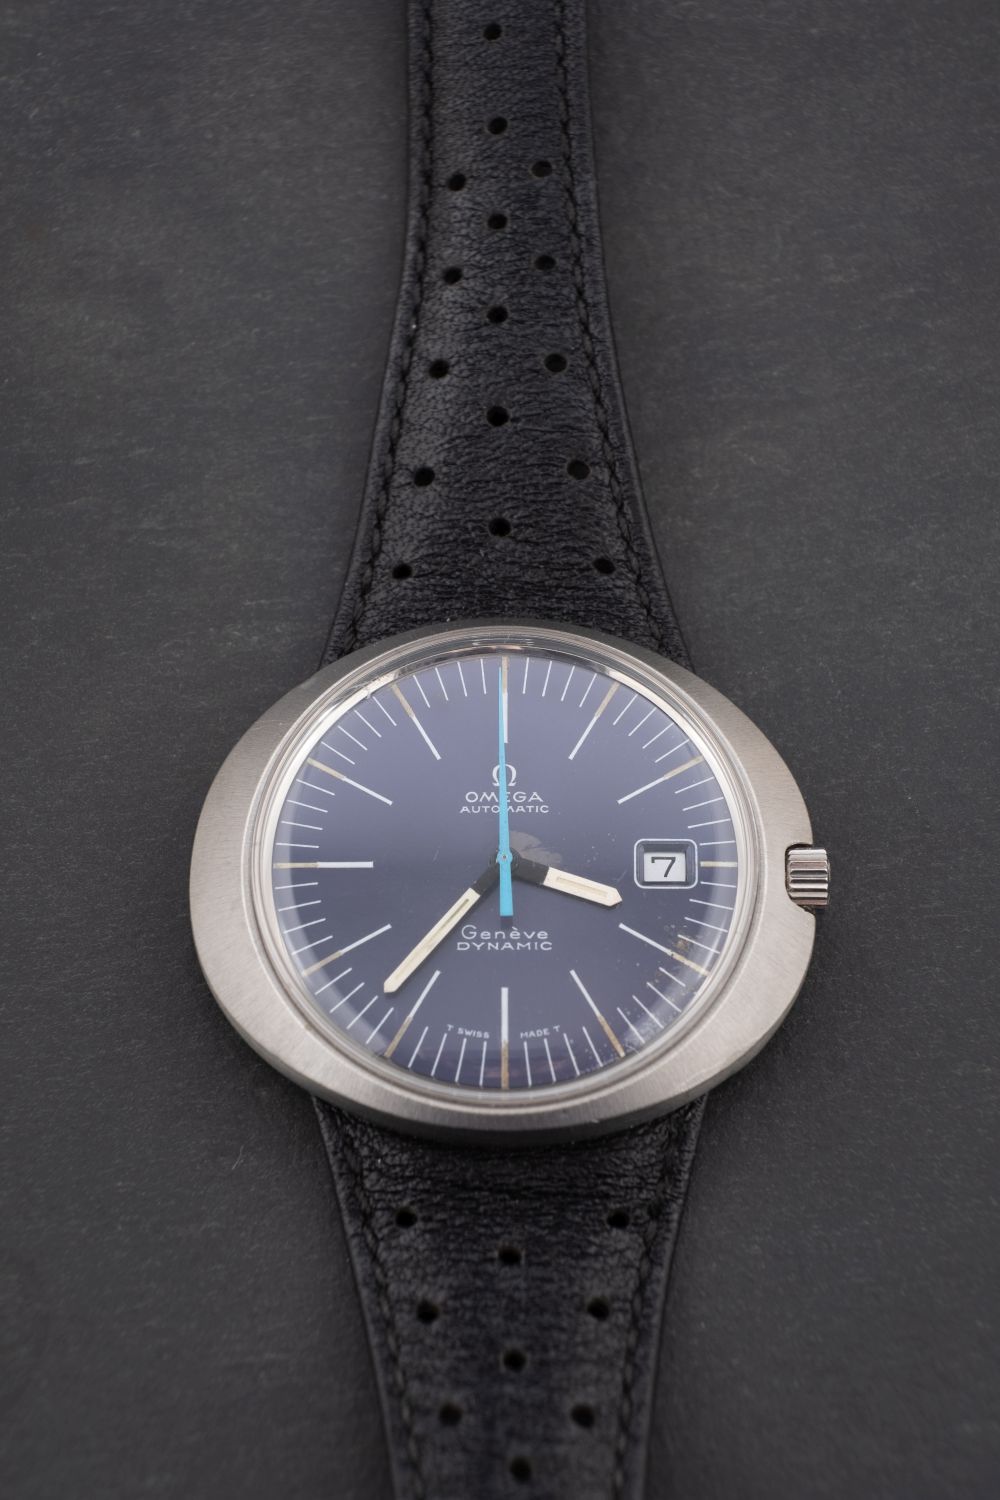 Omega Dynamic a gentleman's wristwatch the blue dial having baton numerals, baton hands, - Image 2 of 2